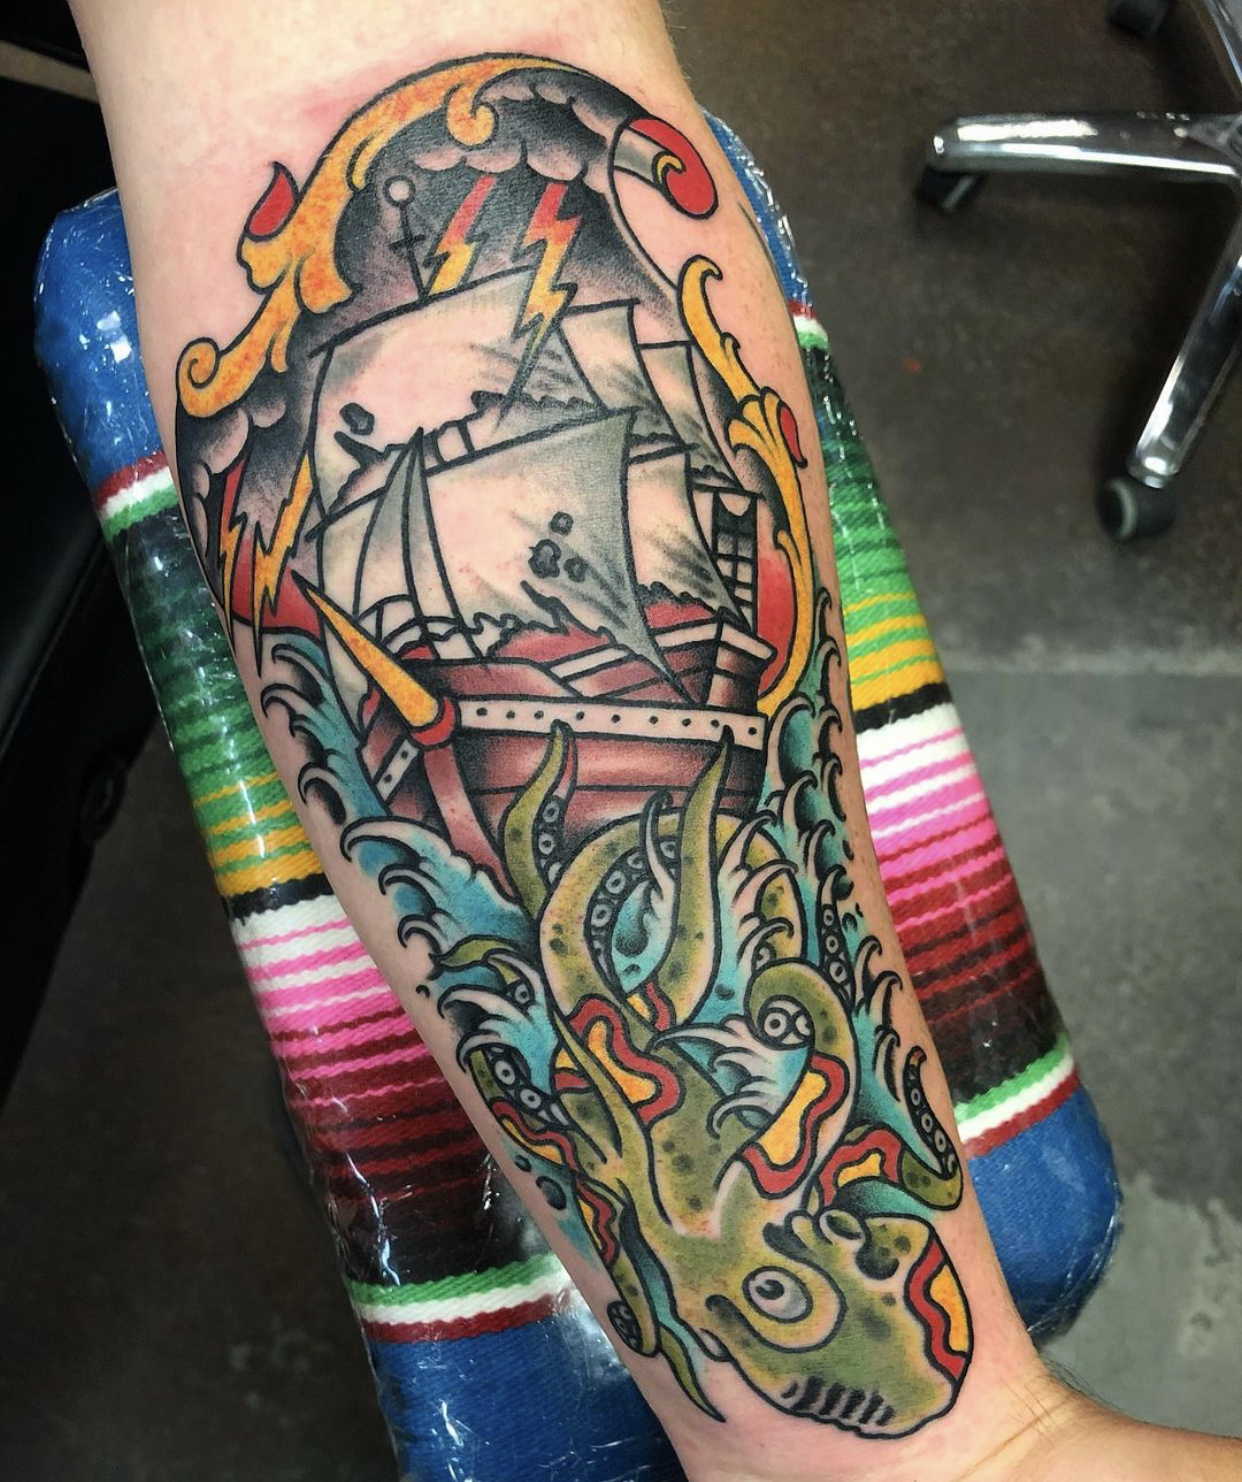 Boat tattoo from top tattoo shop in Downtown Dallas